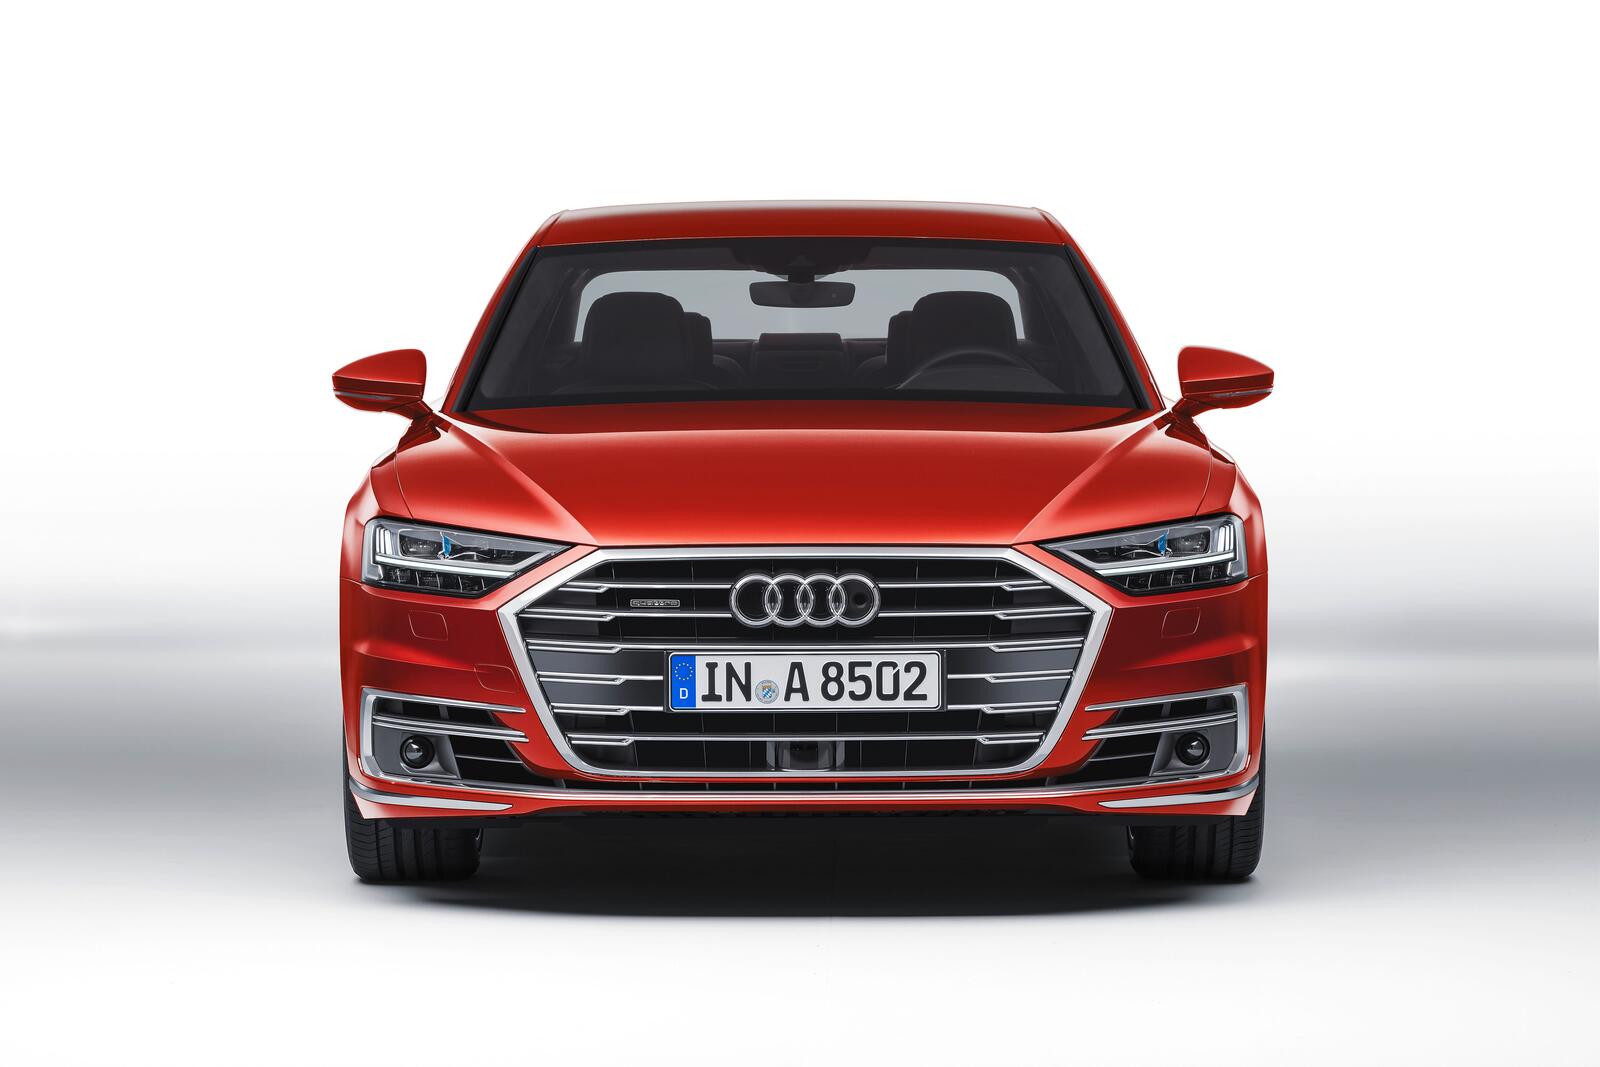 Wallpapers machine red car Audi A8 on the desktop